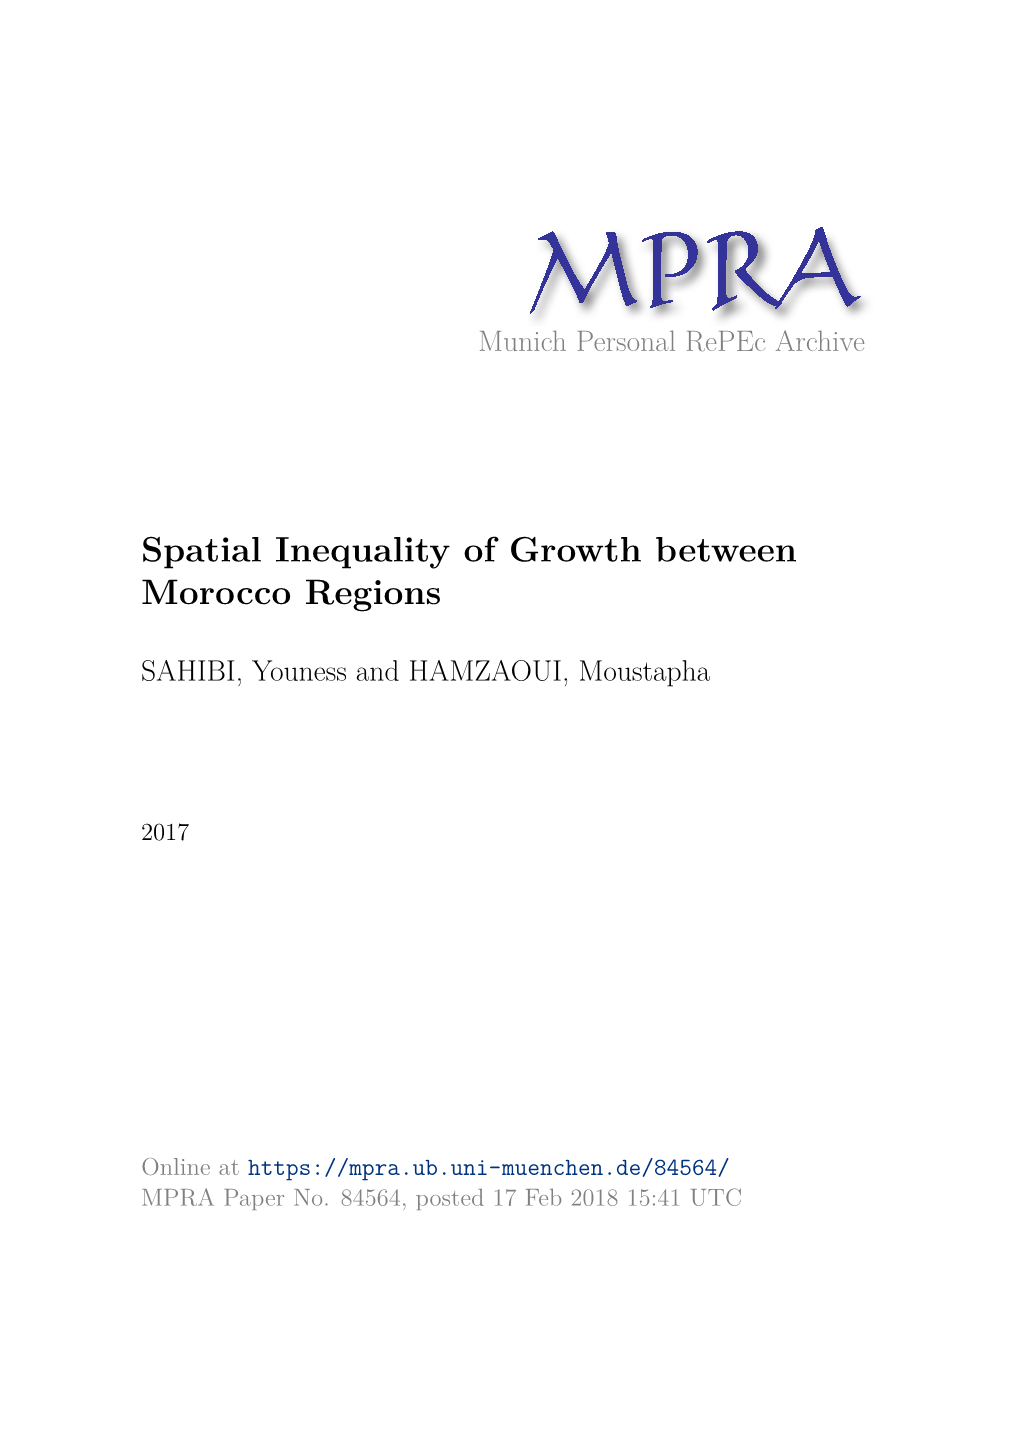 Spatial Inequality of Growth Between Morocco Regions